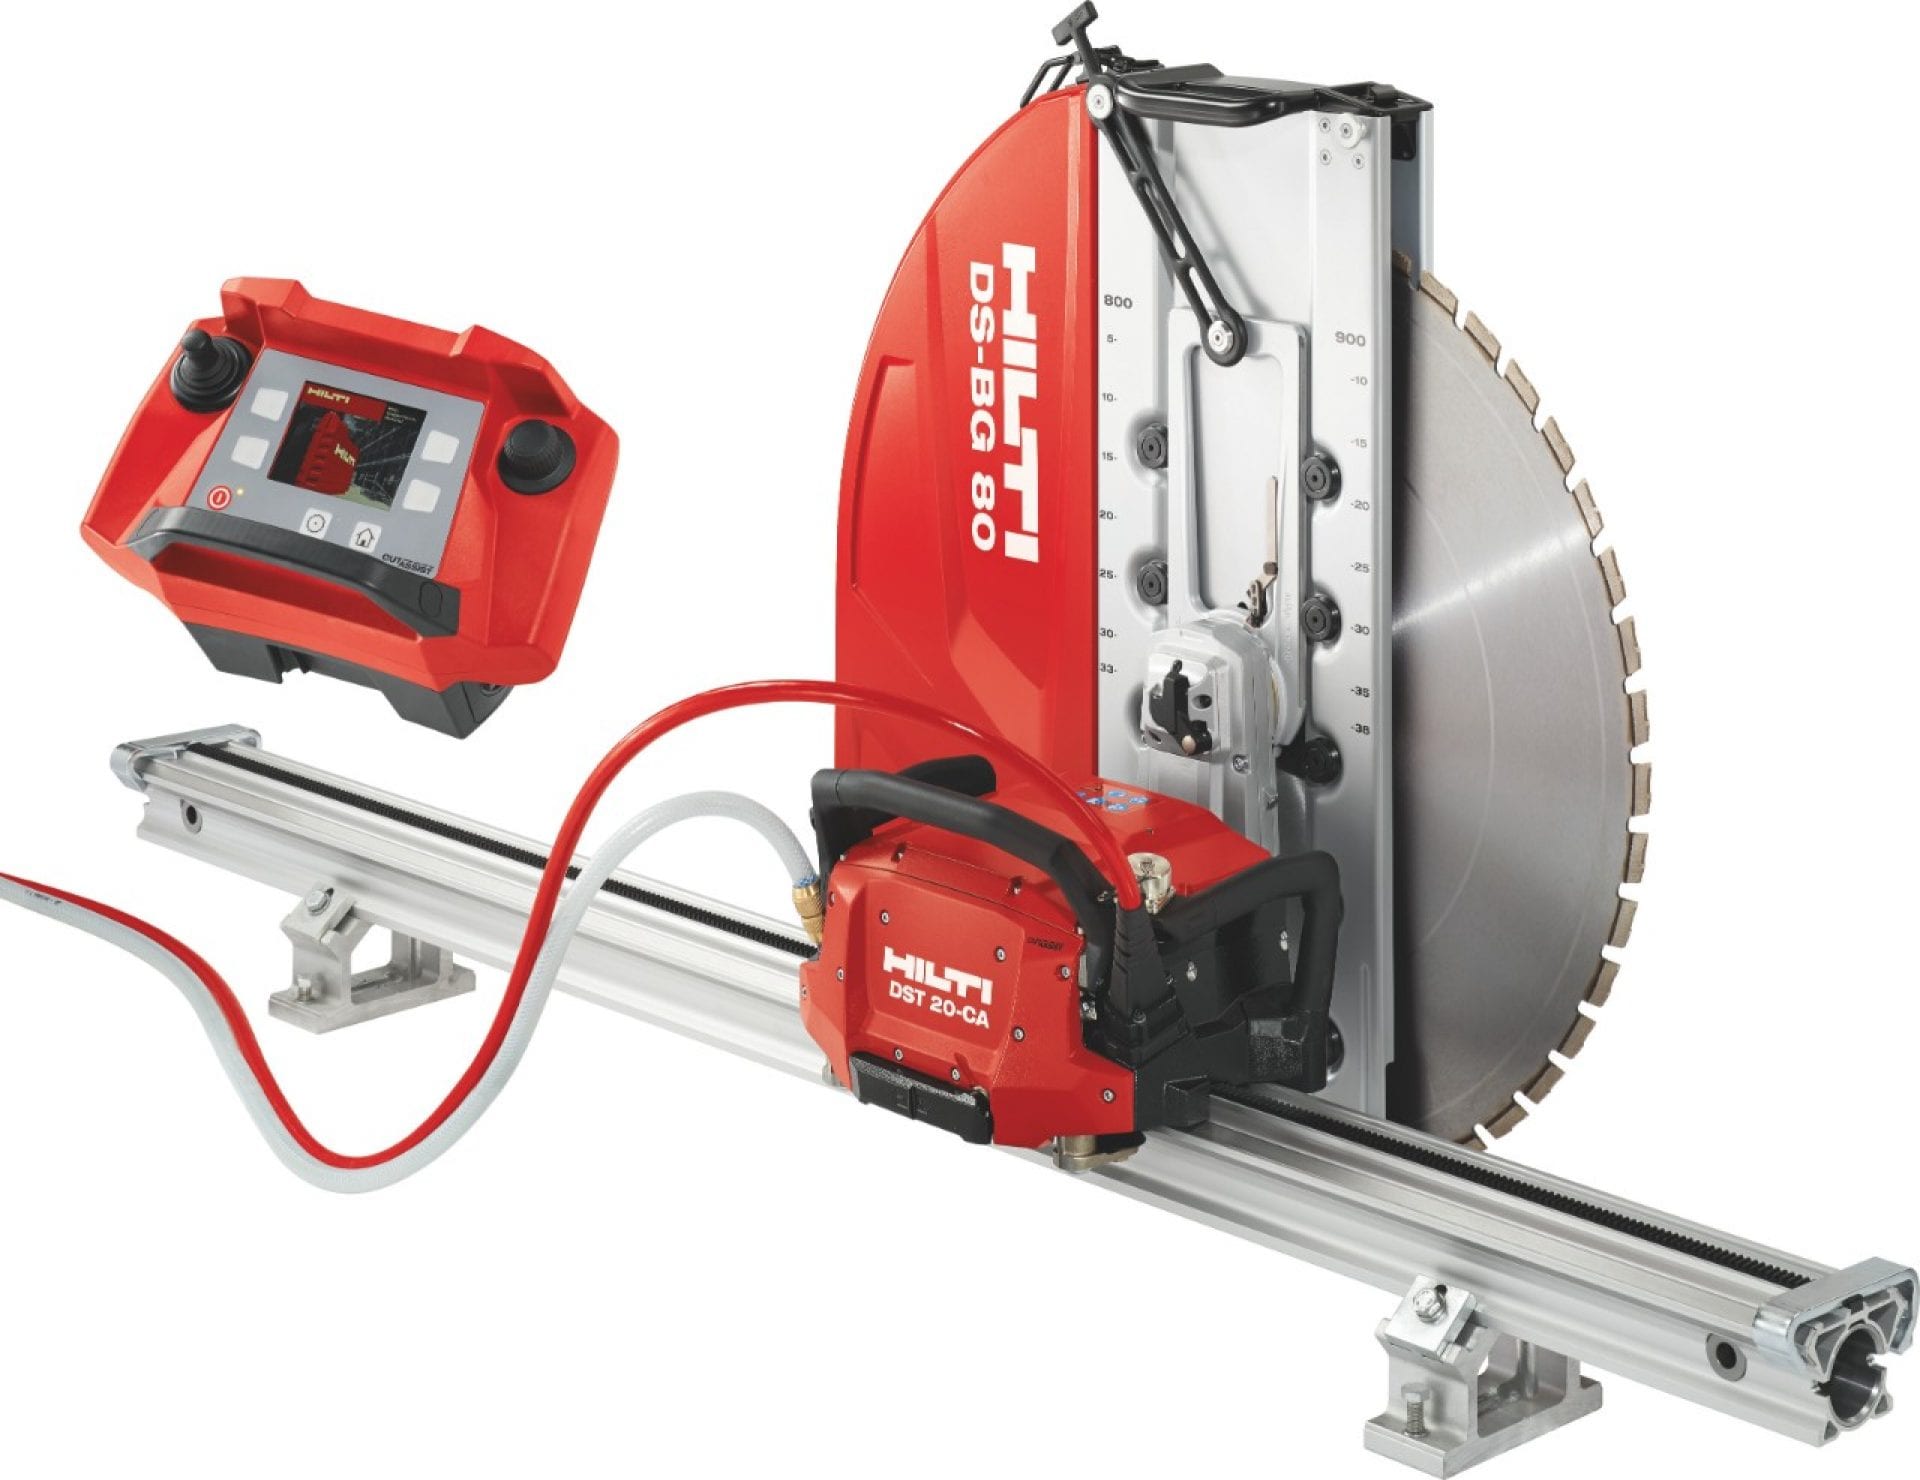 Hilti Electric diamond wall saw with remote control and no electrical box